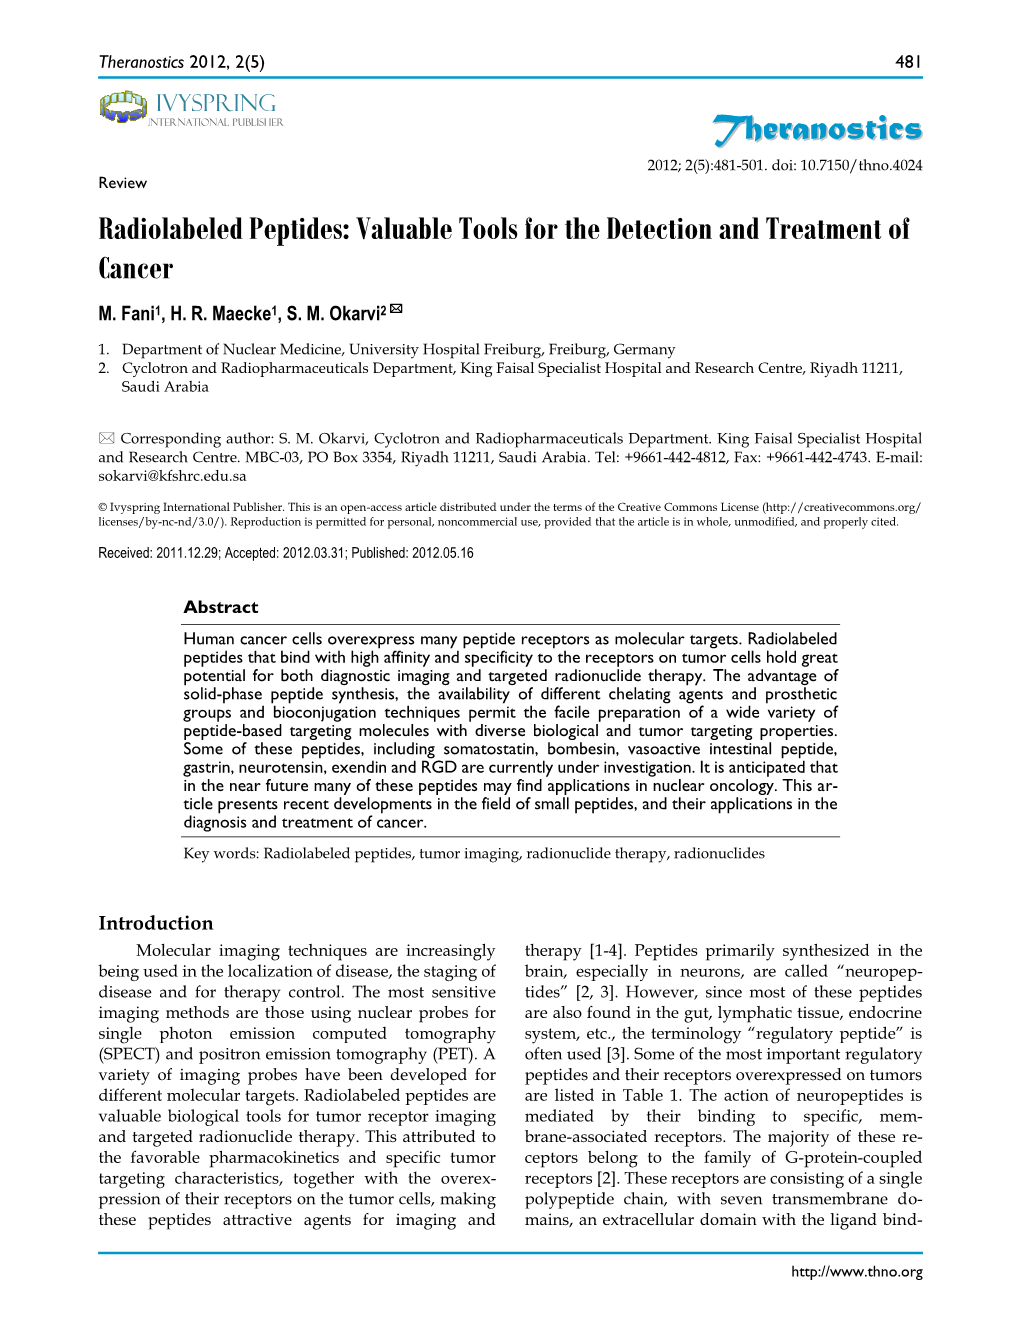 Radiolabeled Peptides: Valuable Tools for the Detection and Treatment of Cancer M